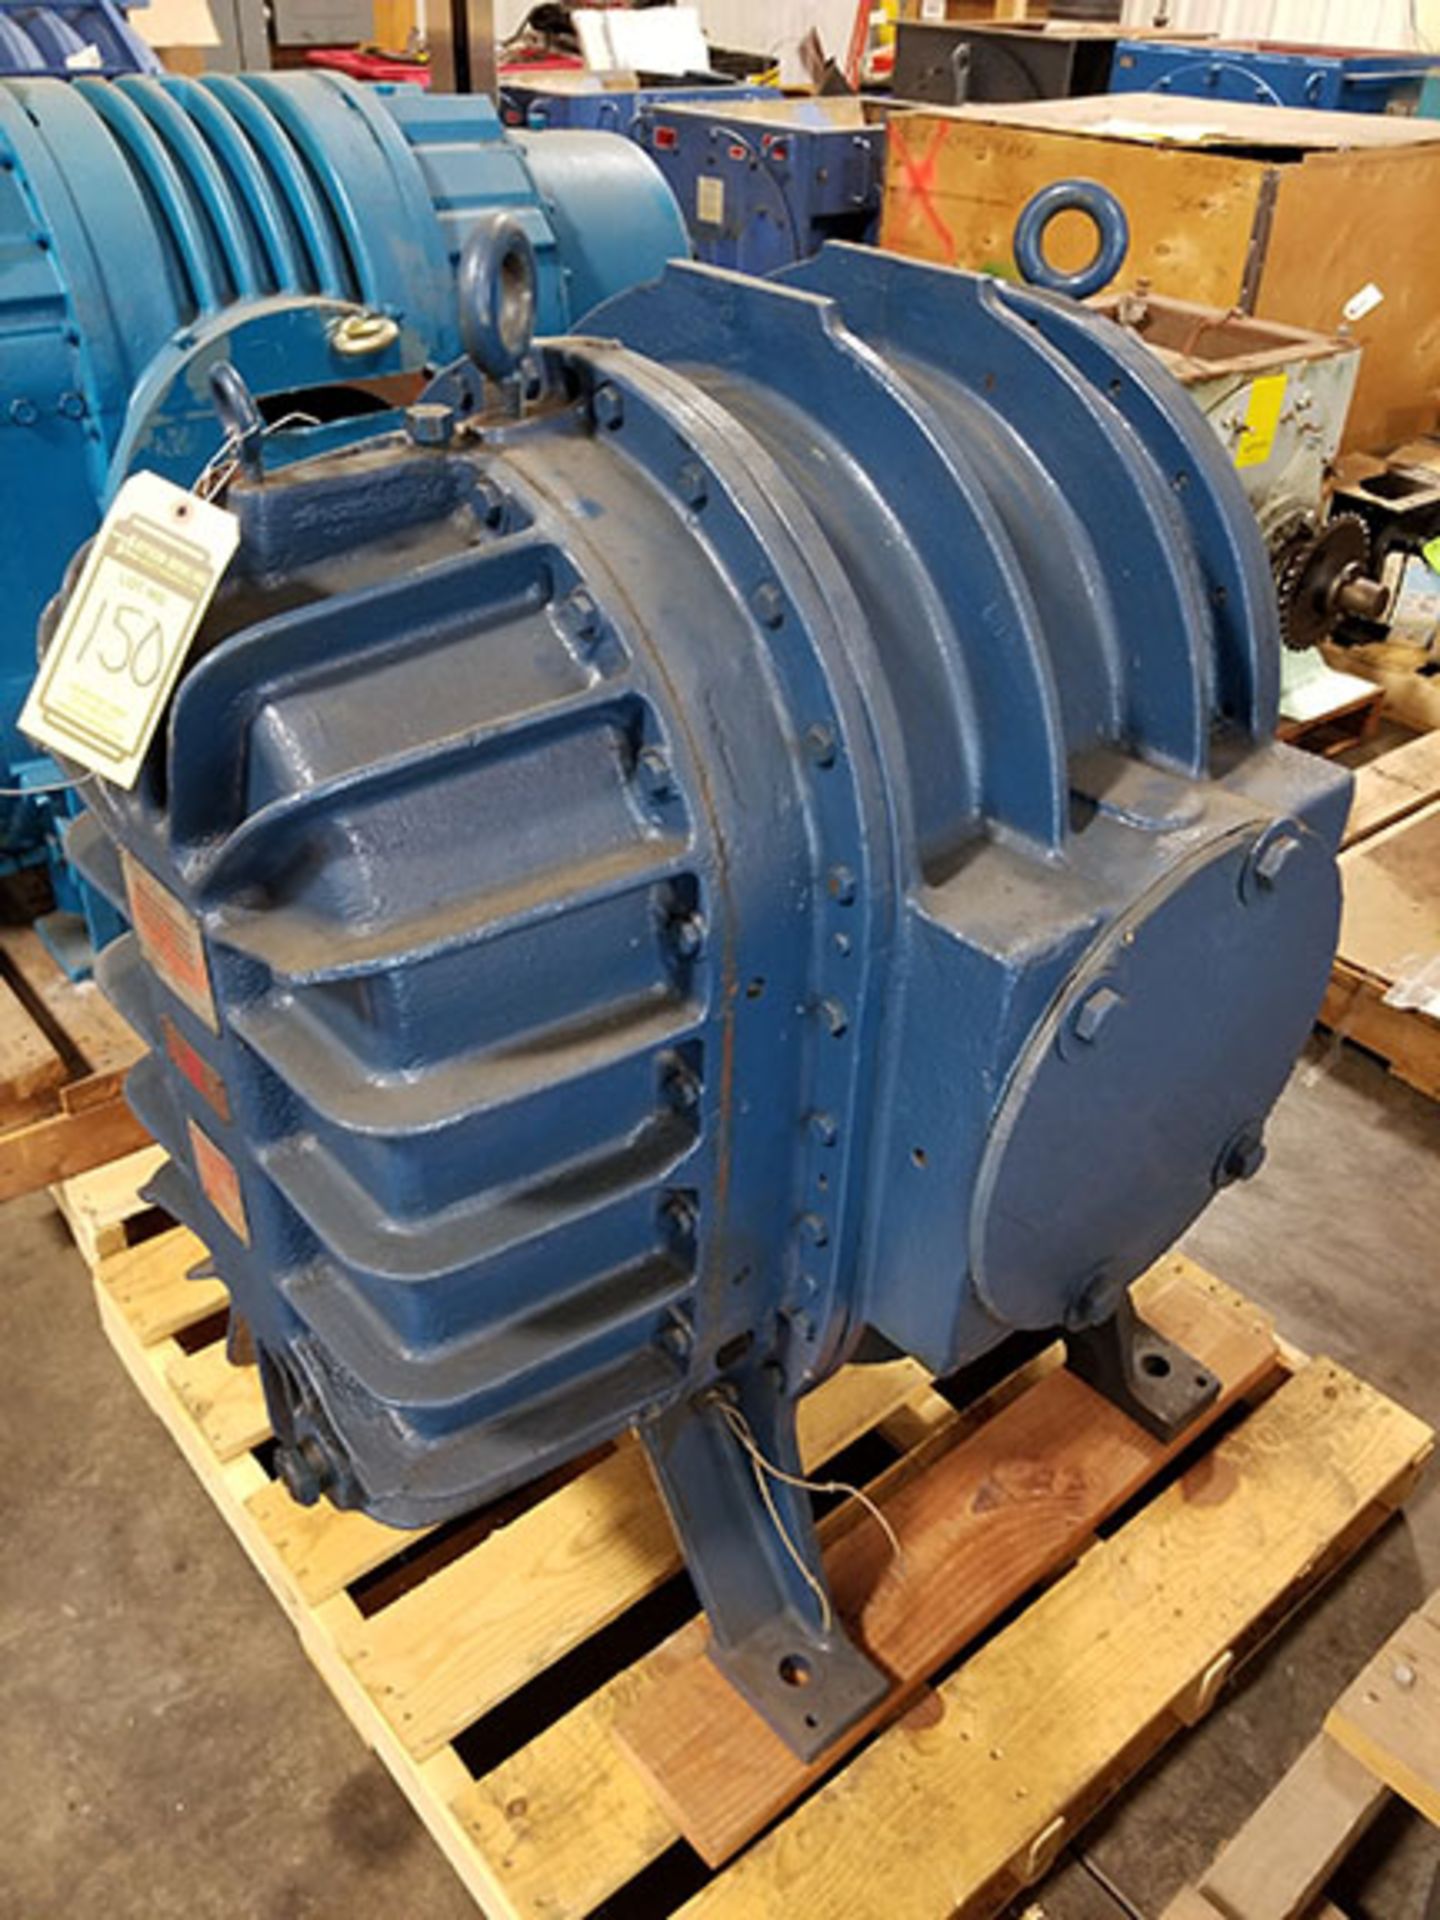 ROTARY LOBE BLOWER, 12" C 16" RAS-V WITH IBB, 35574 INLET VOLUME, 845 RPM, 1998, 68 G. DISCHARGE - Image 5 of 6